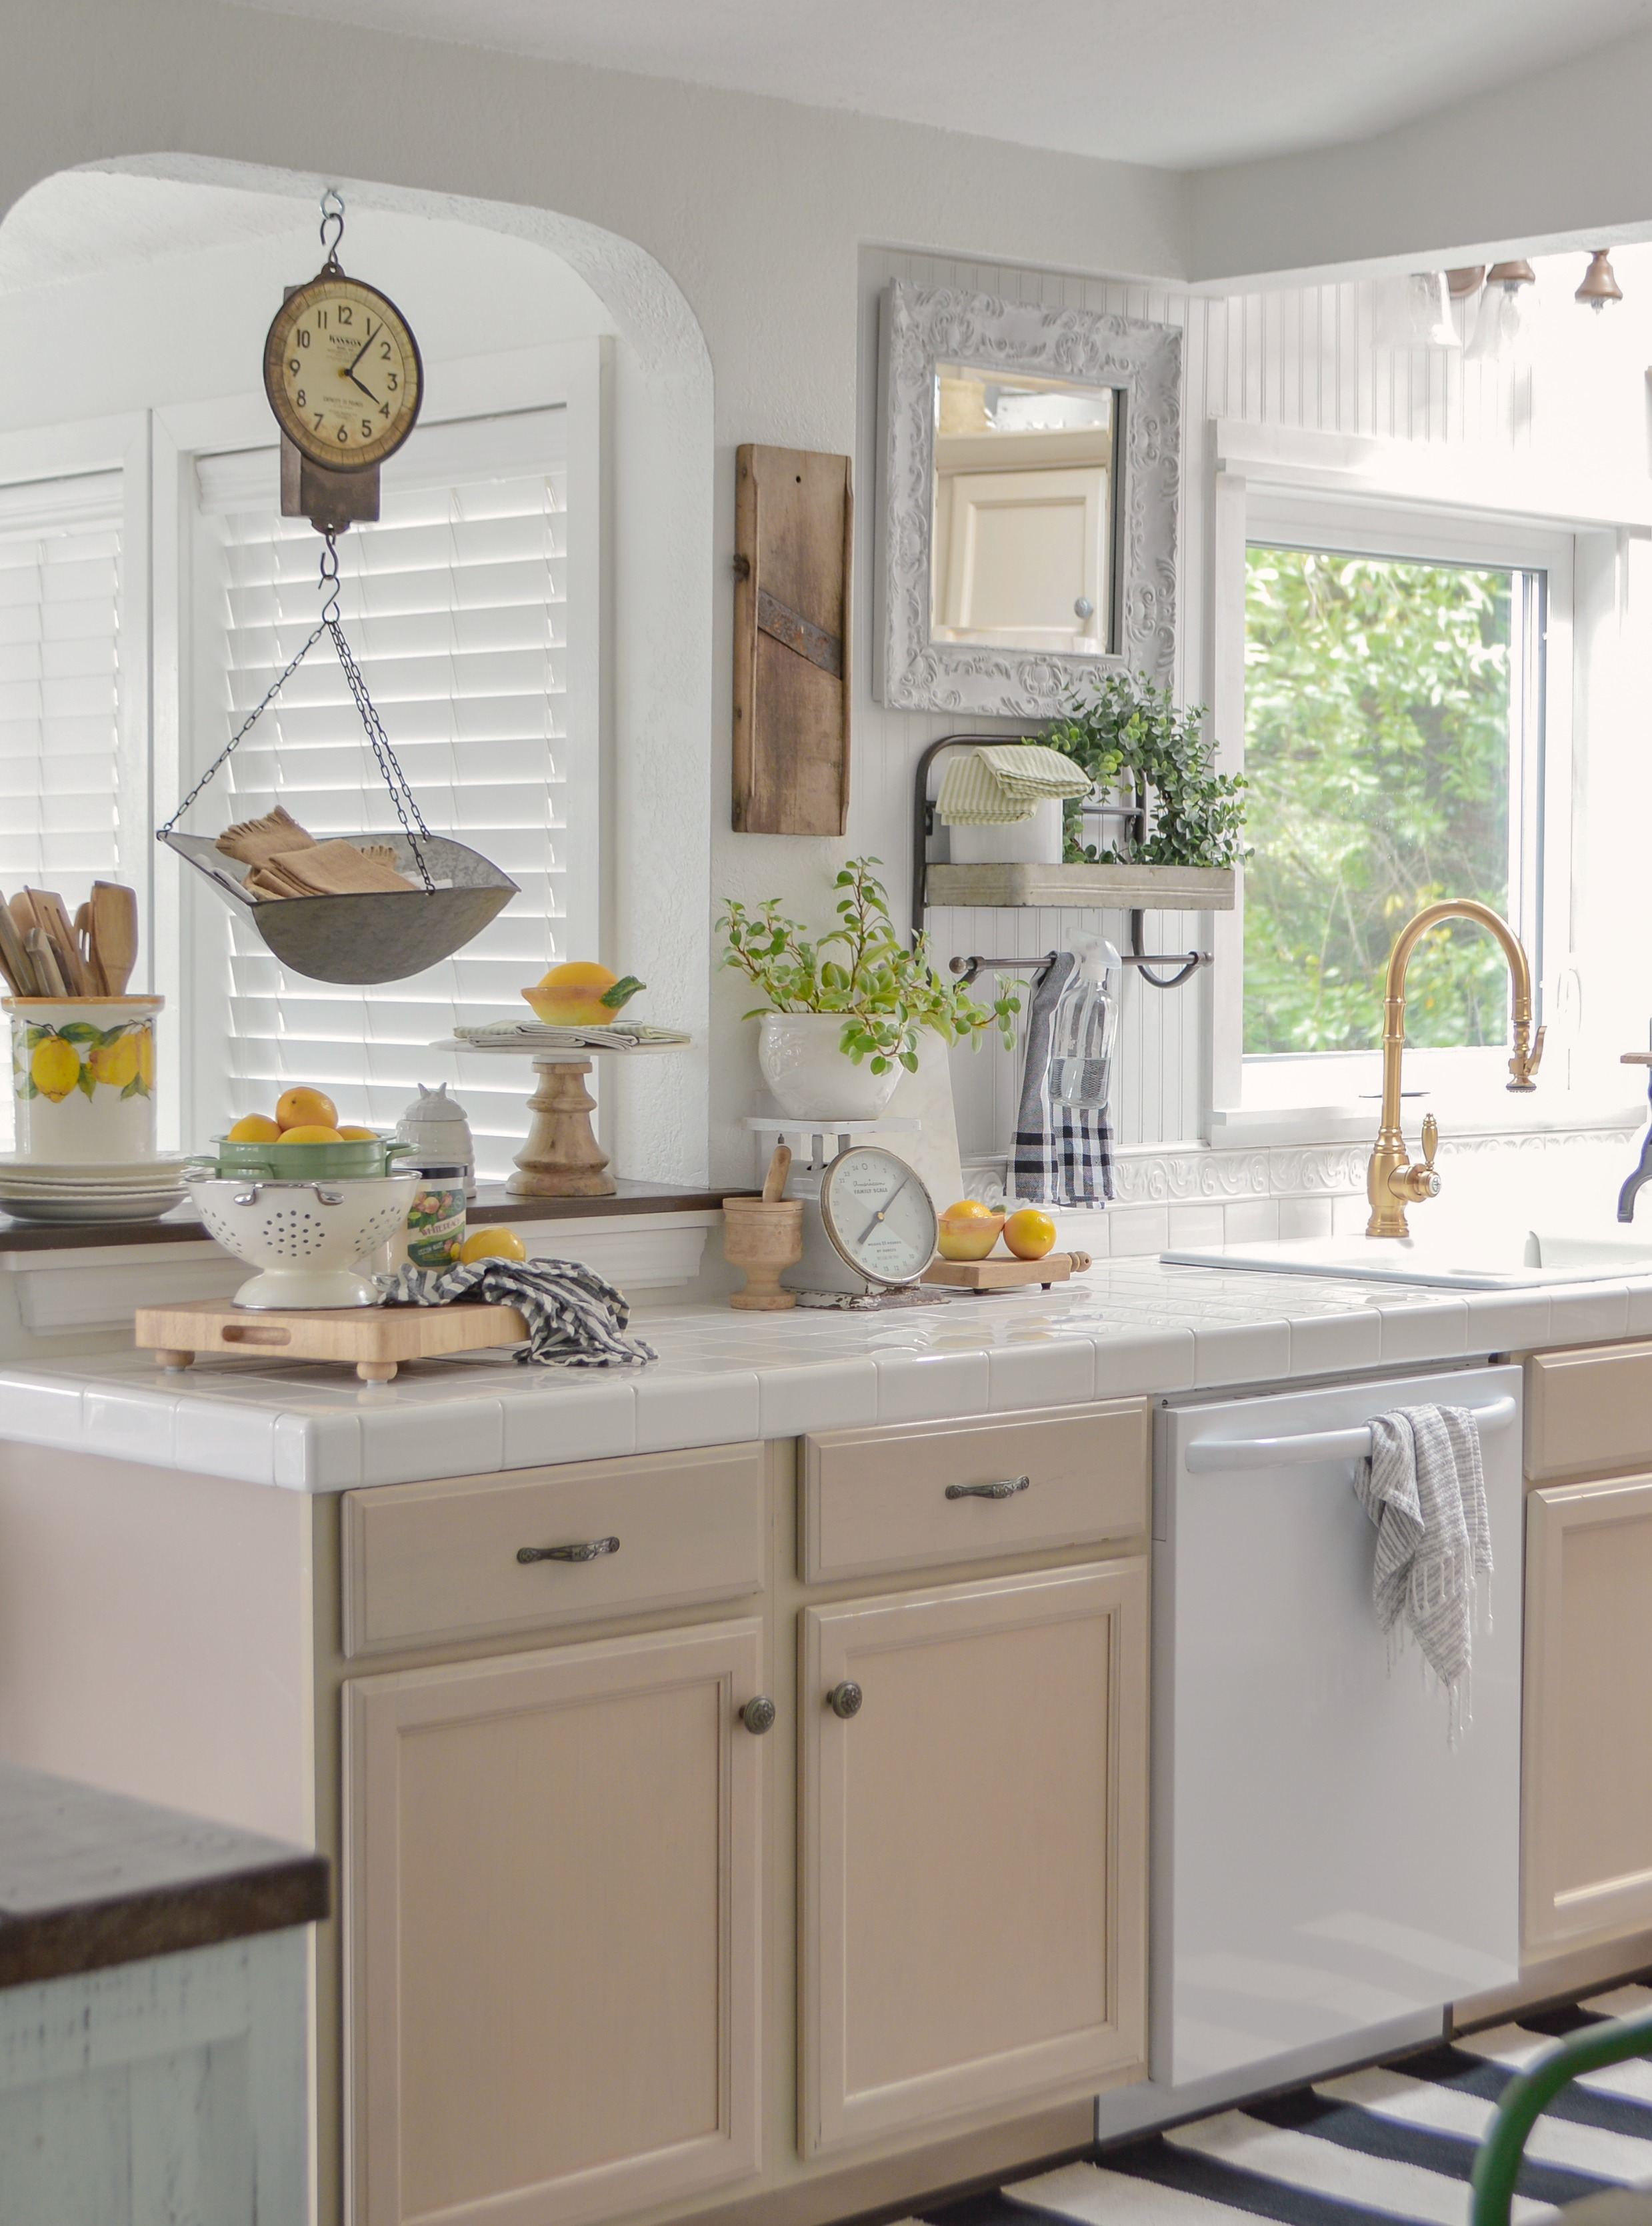 11 Simple Kitchen Decorating Ideas - The Sommer Home